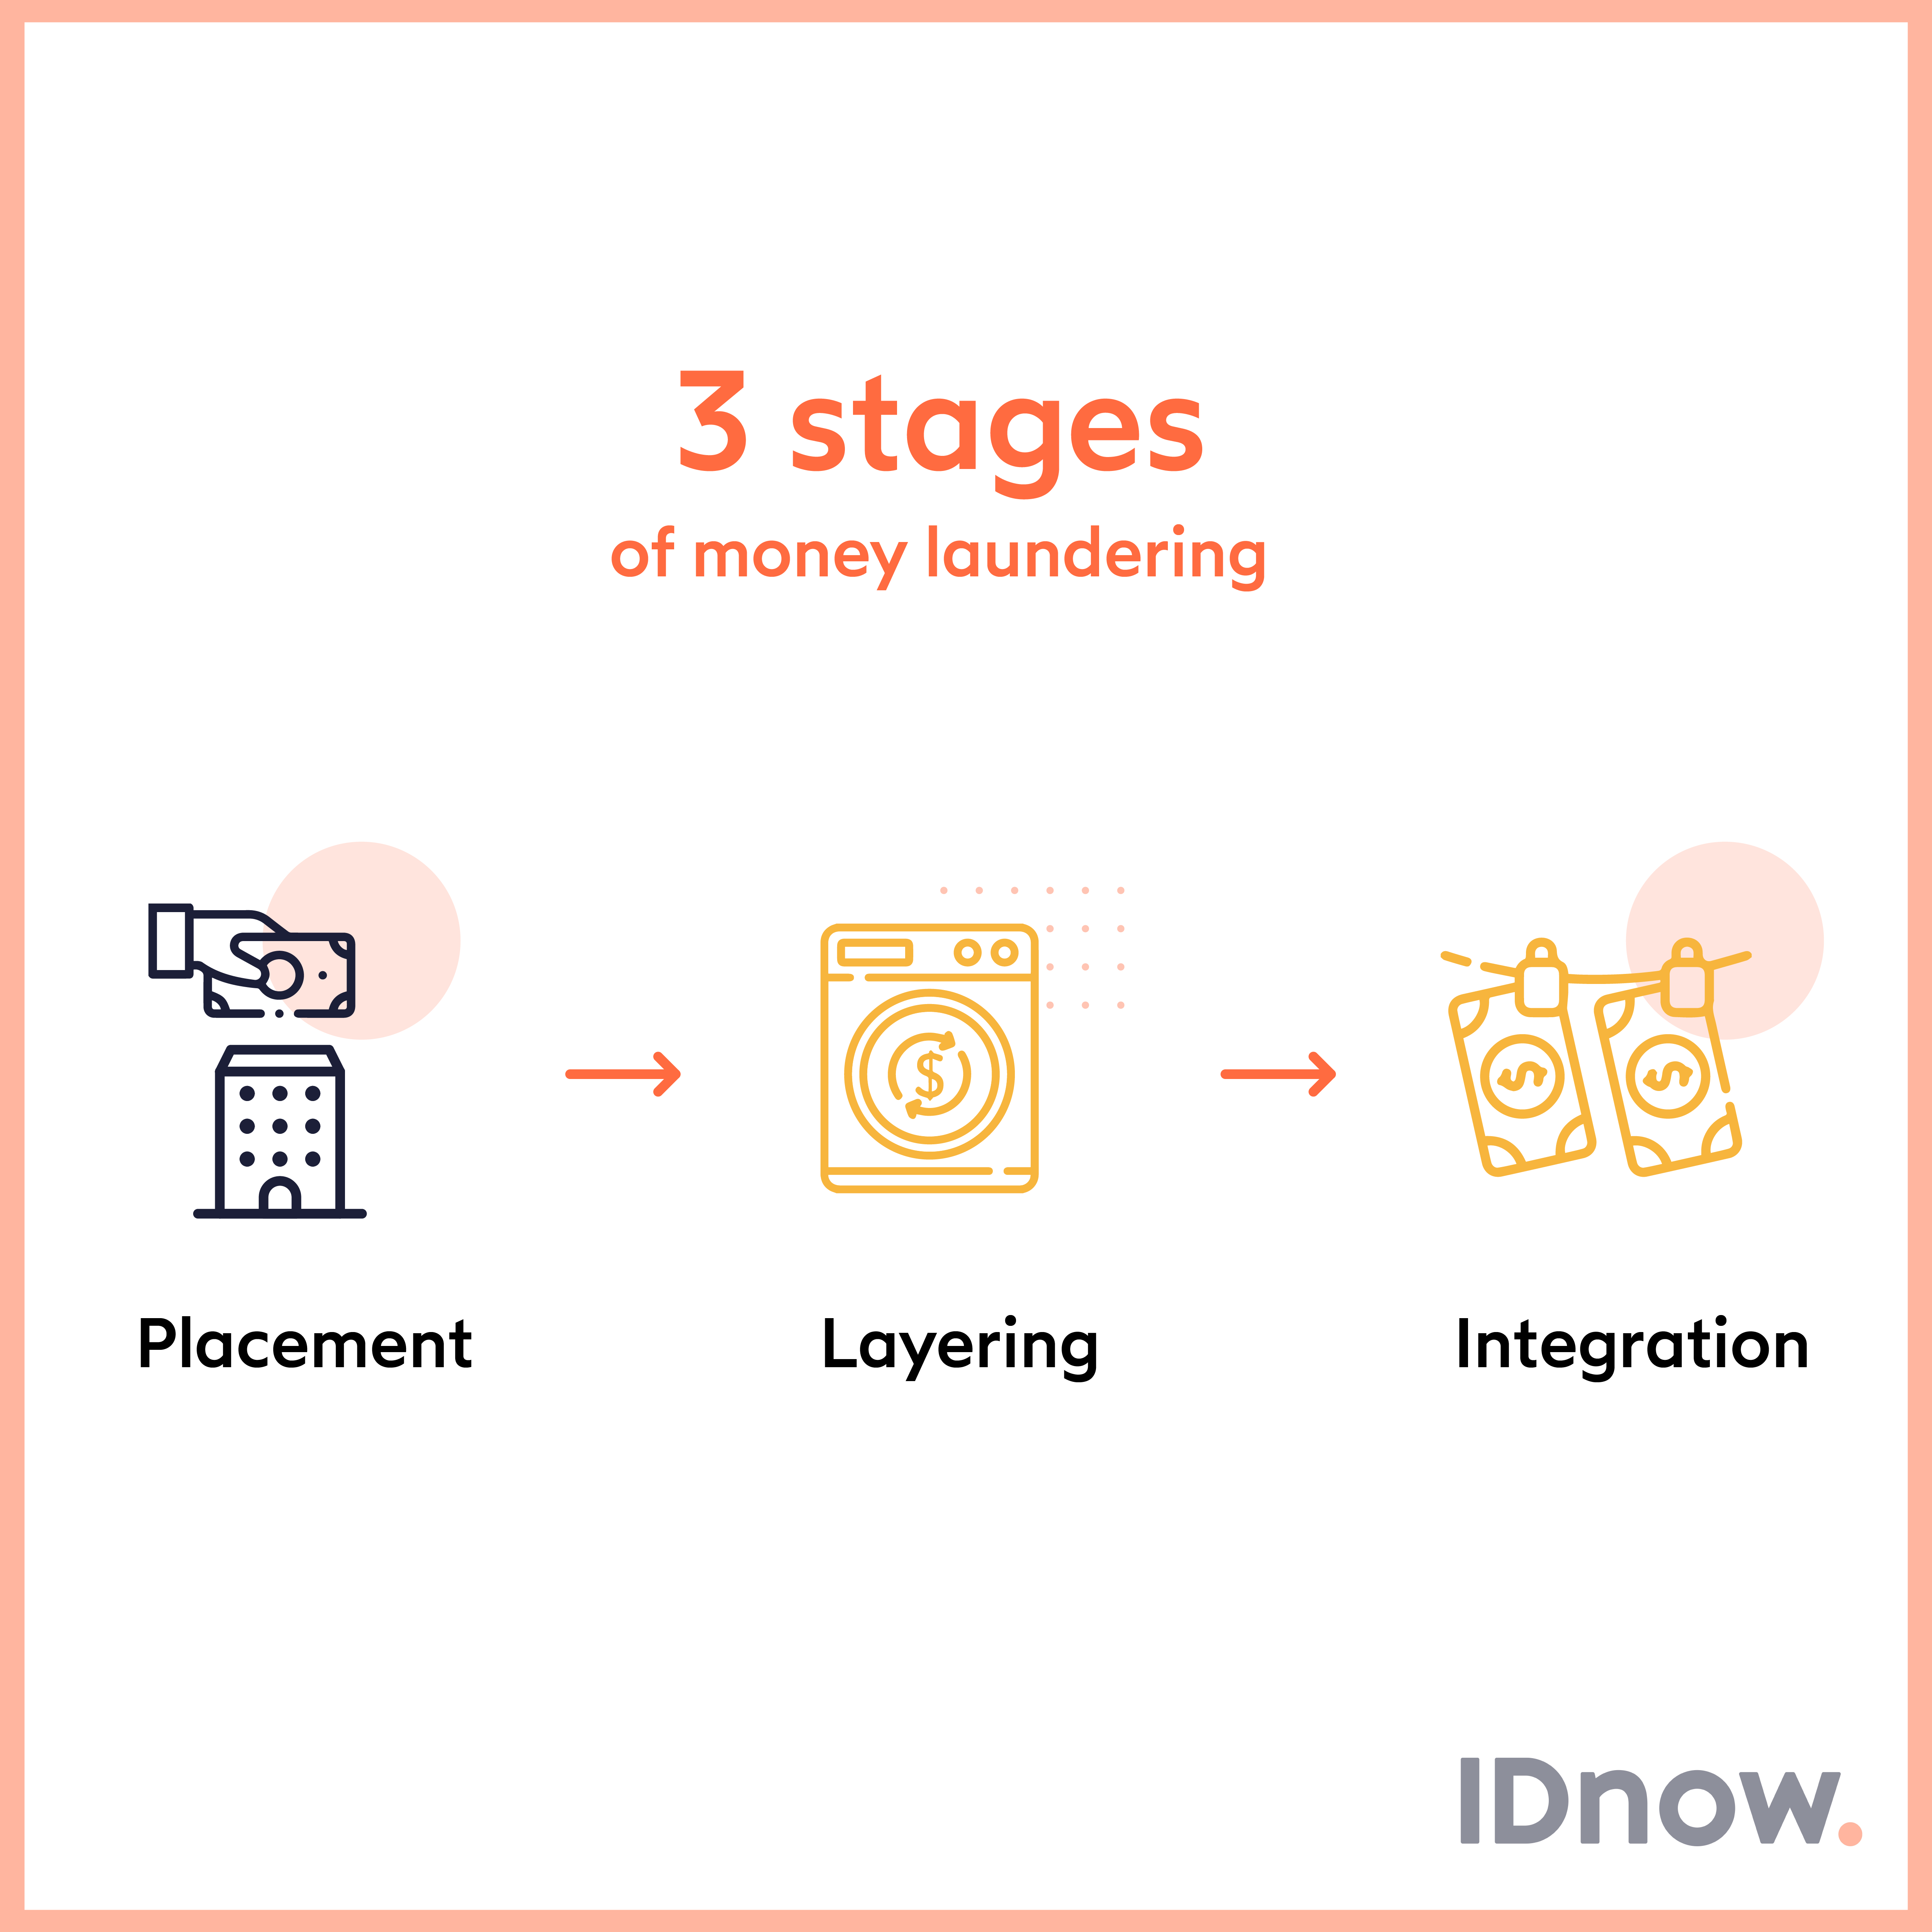 Explaining the 3 stages of money laundering.